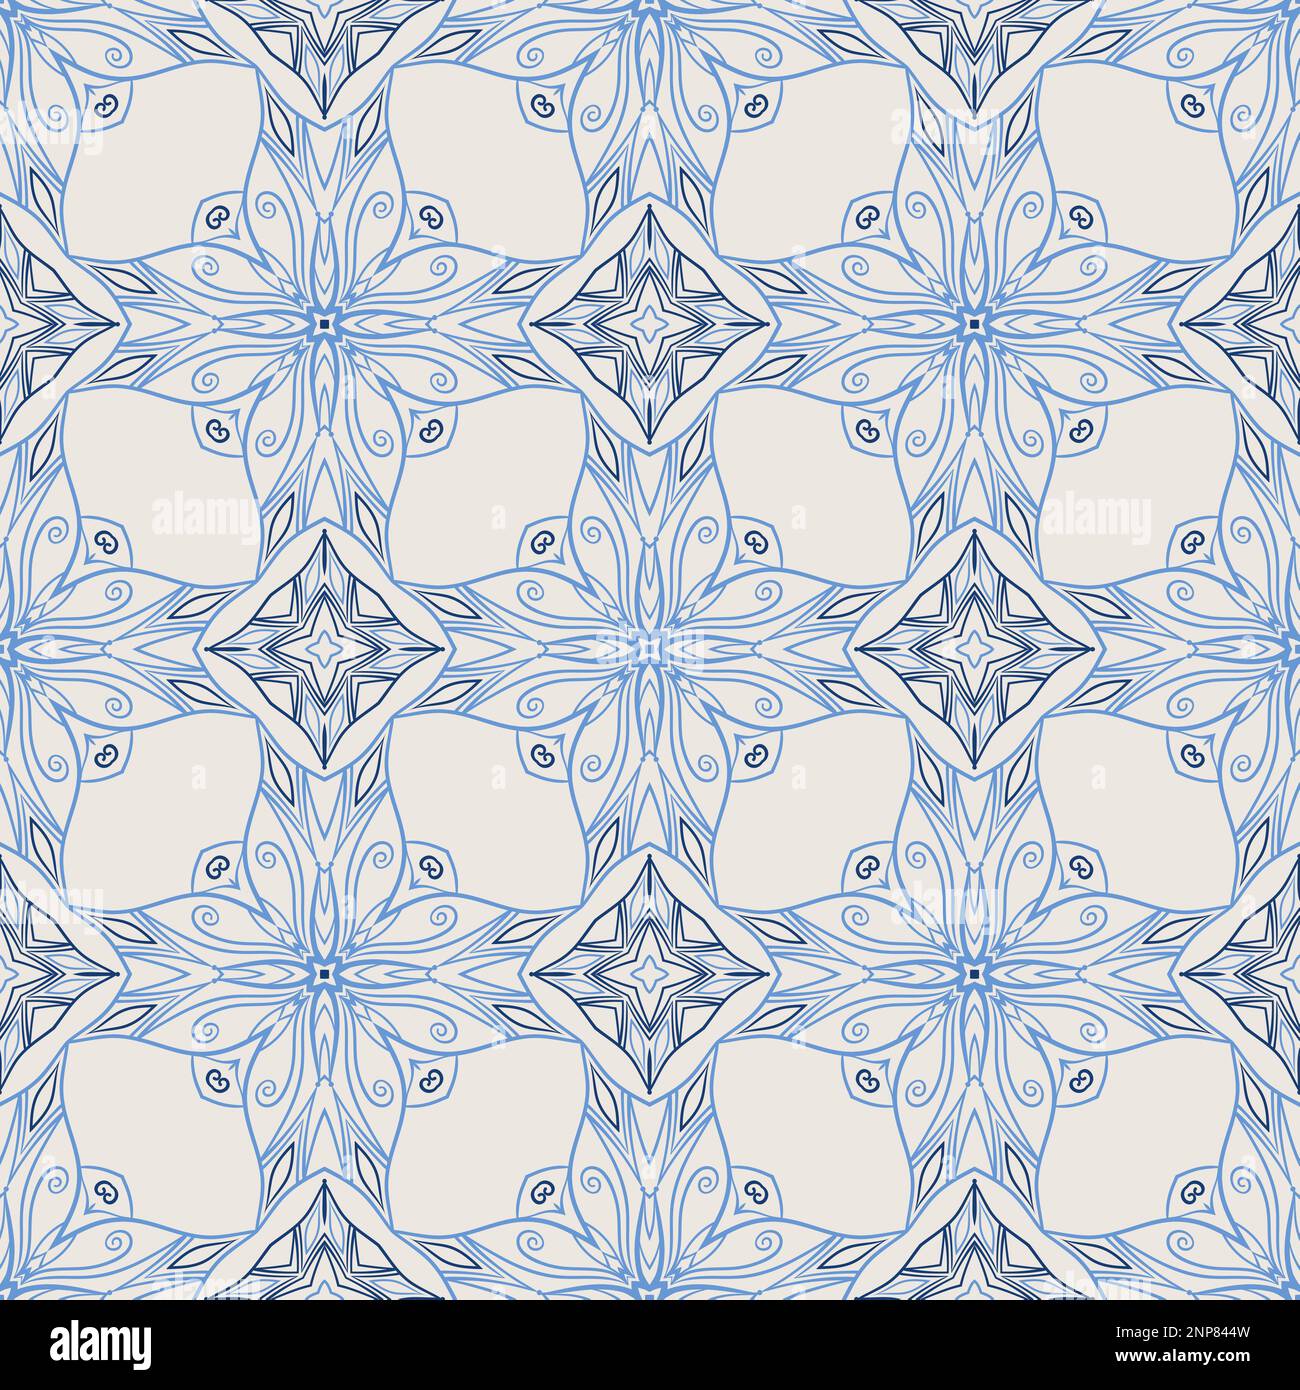 Vintage tile pattern. Seamless blue and white background with flower design Stock Vector